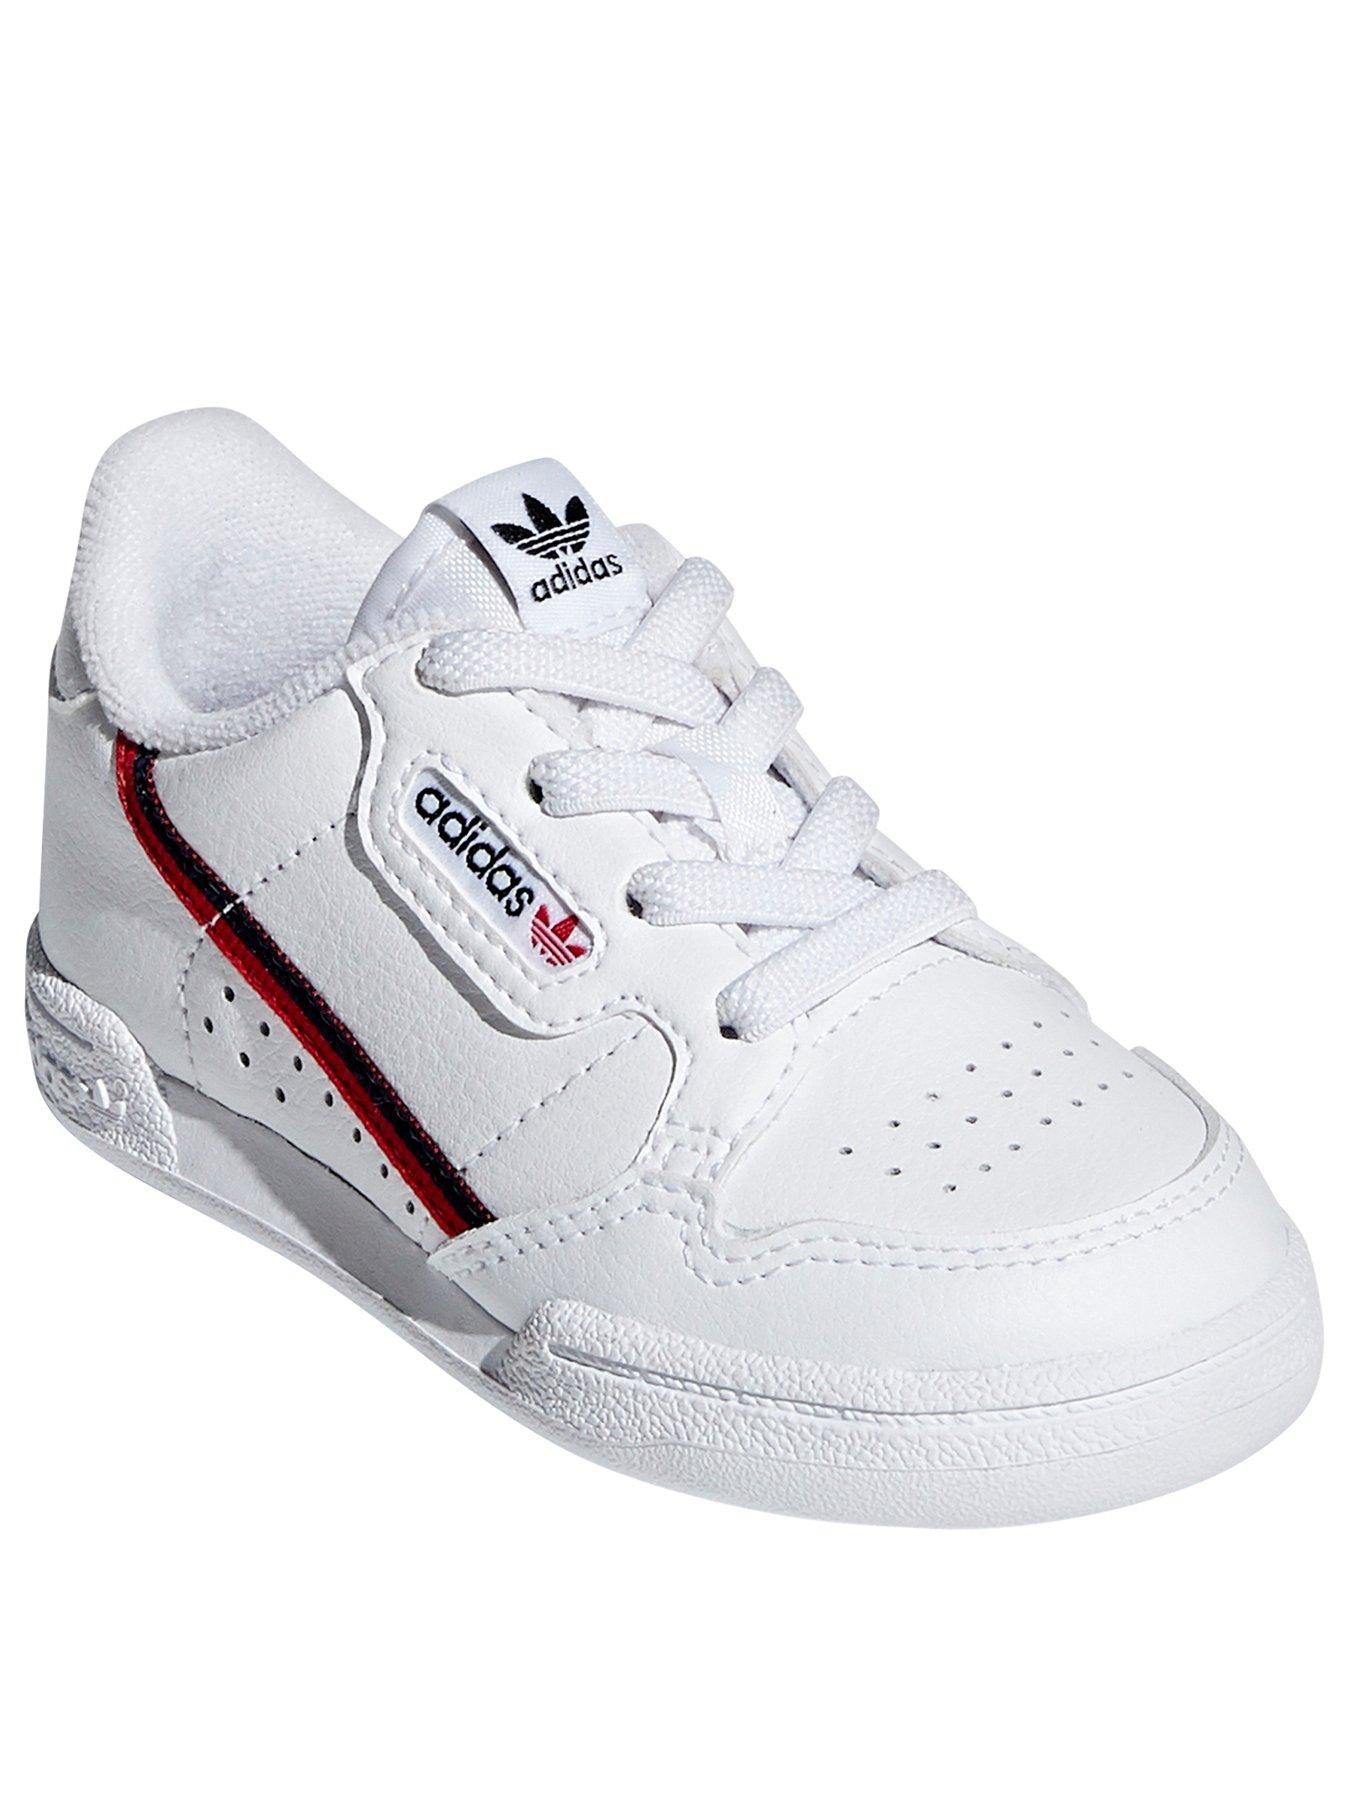 boys trainers infant size 8